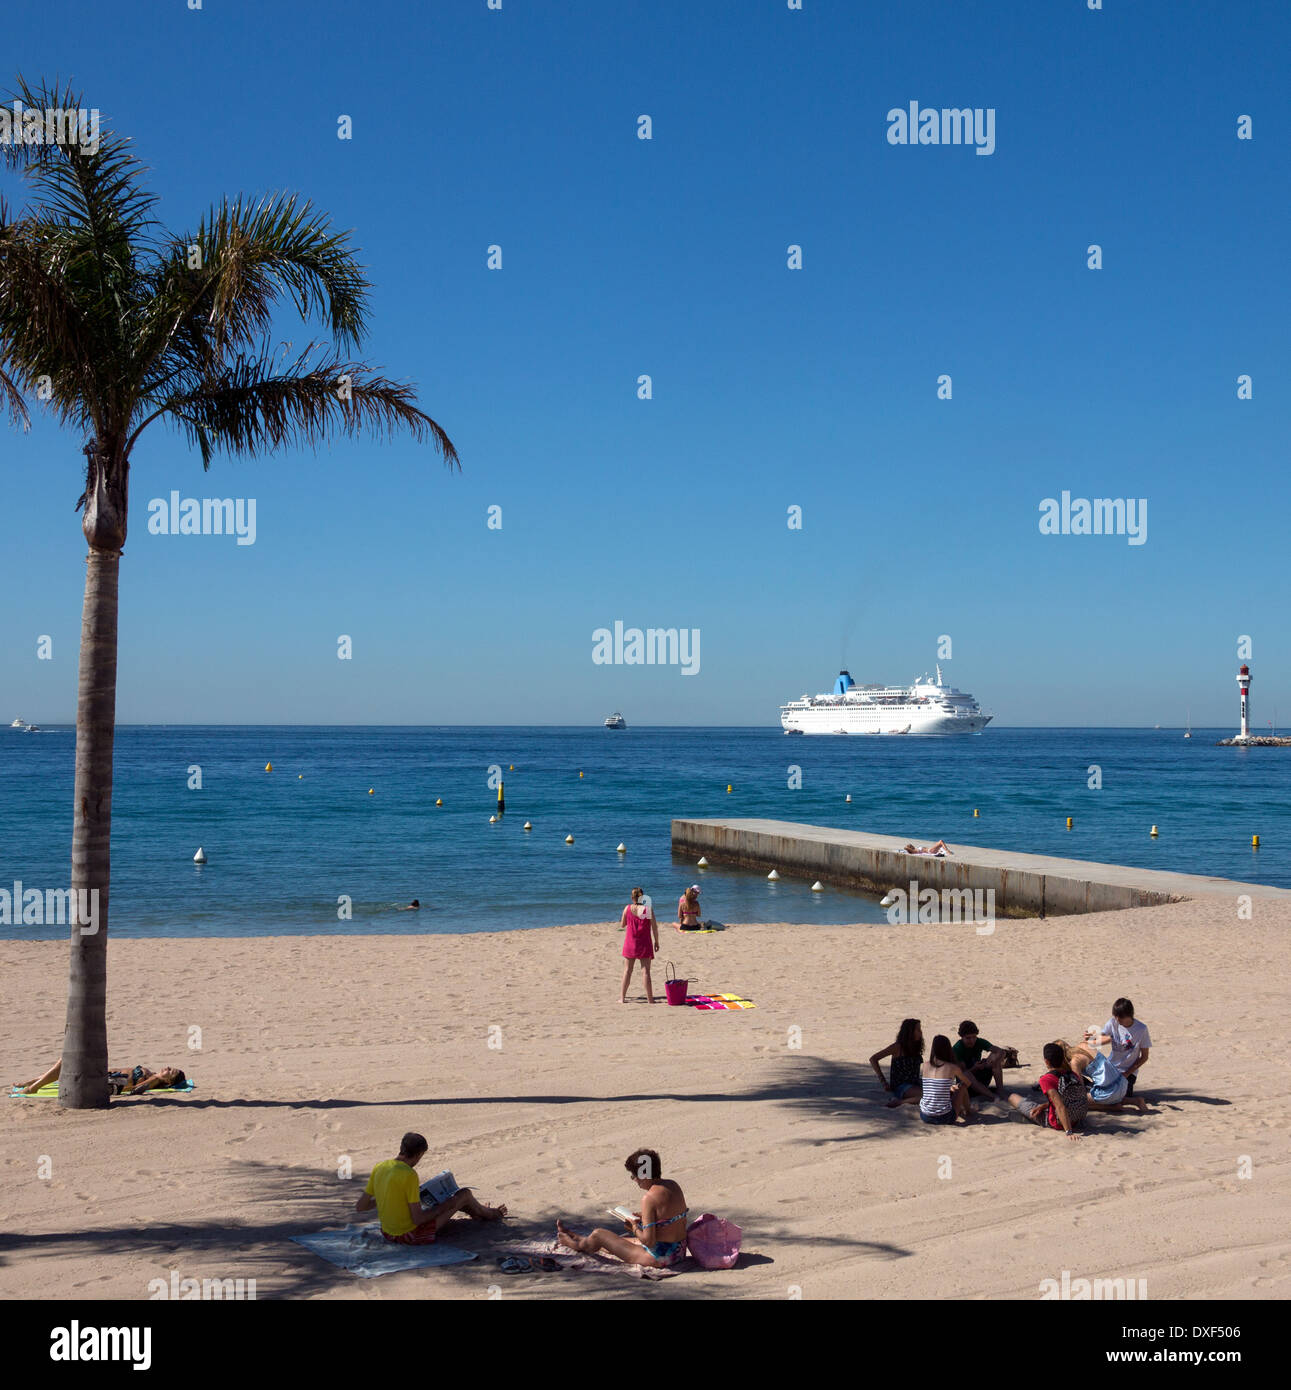 The beach at Cannes on the Cote d'Azur in the South of France. Stock Photo